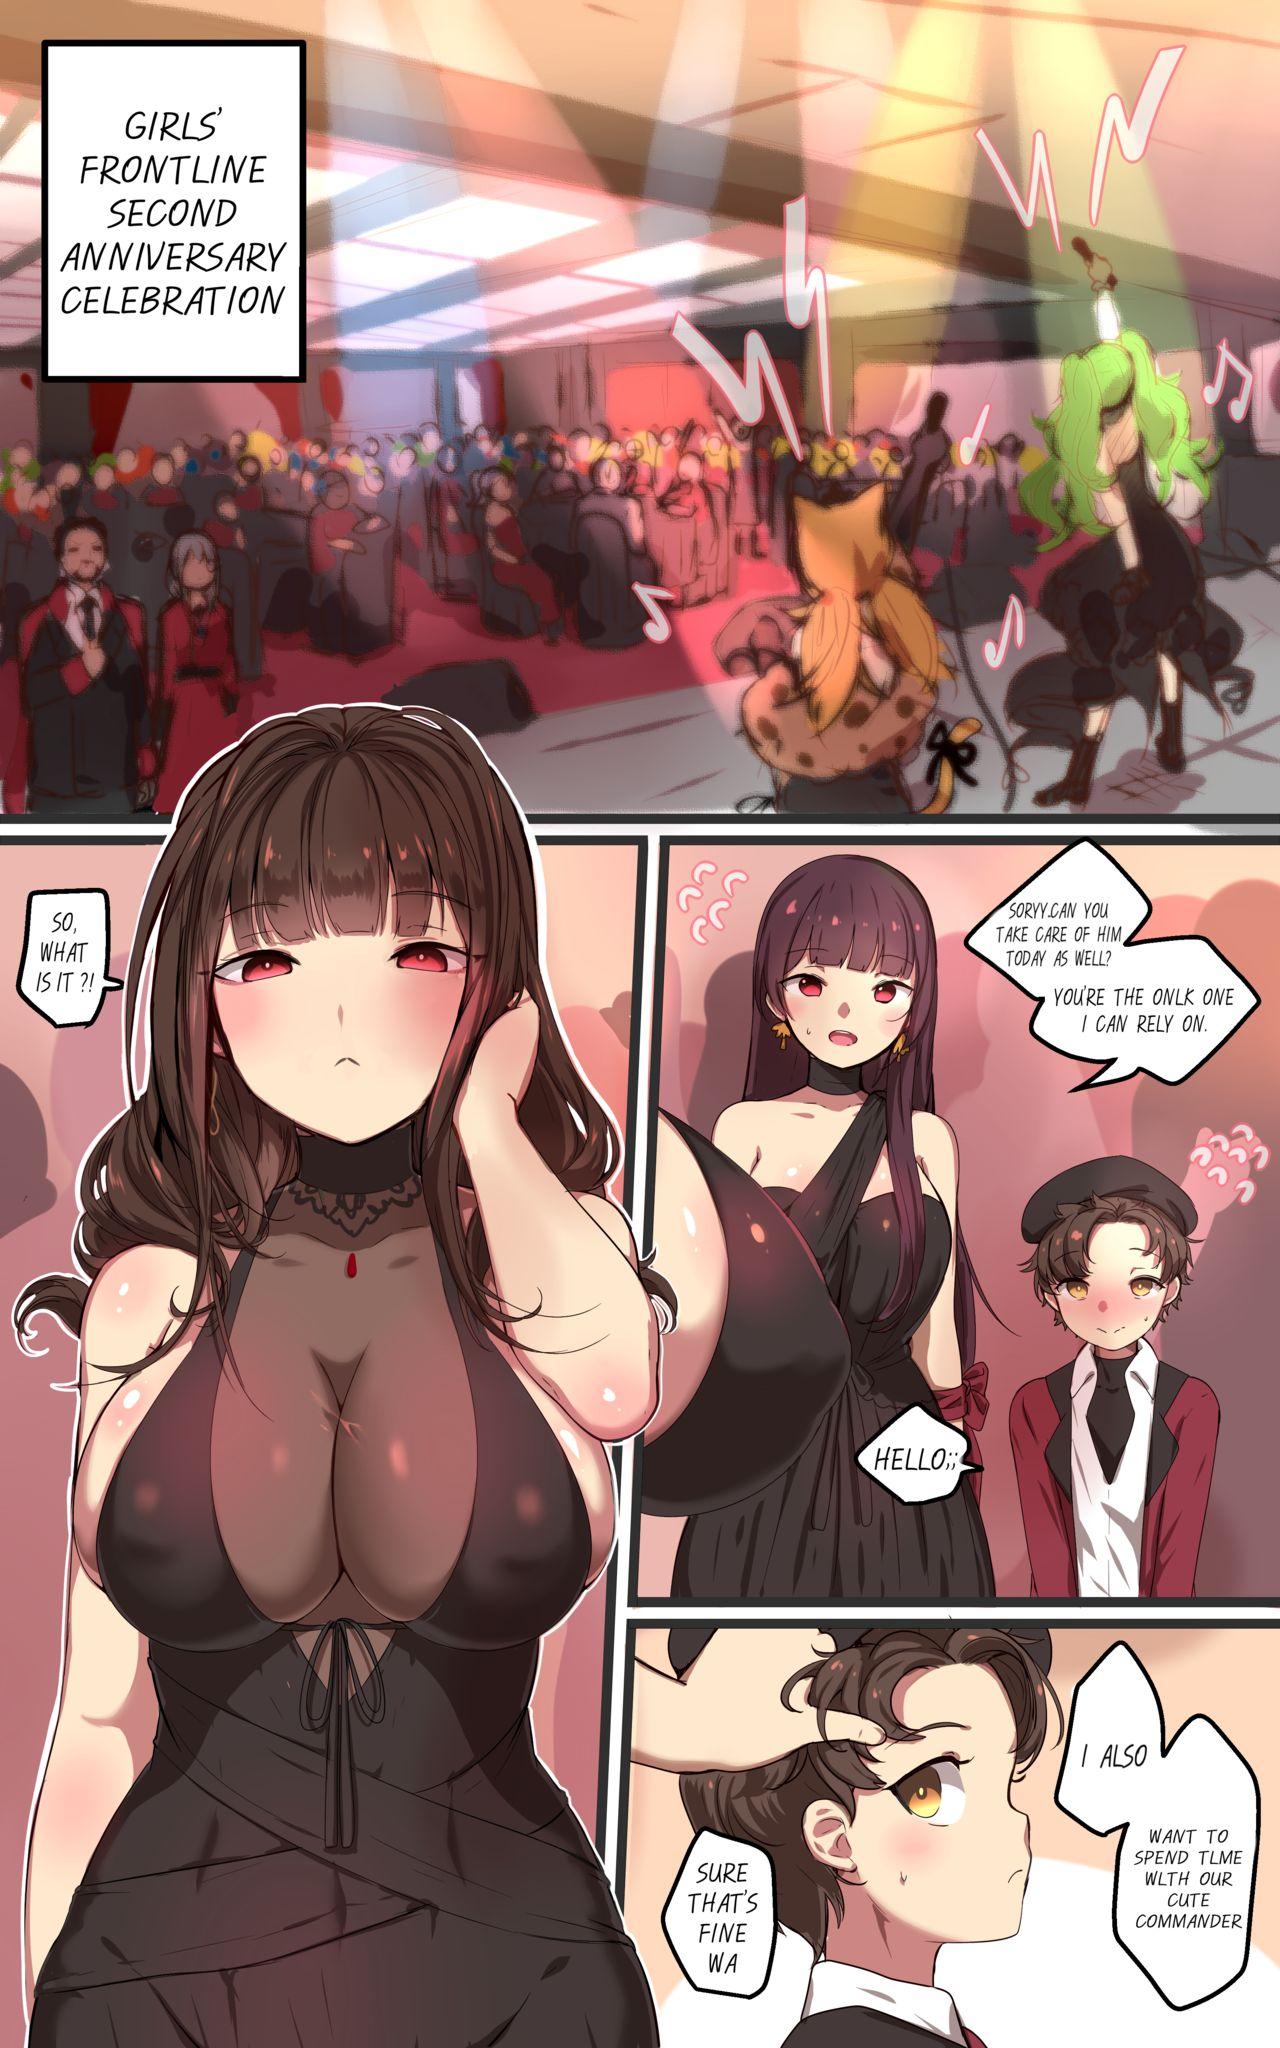 Public Nudity How to use dolls 07 - Girls frontline Chat - Page 2